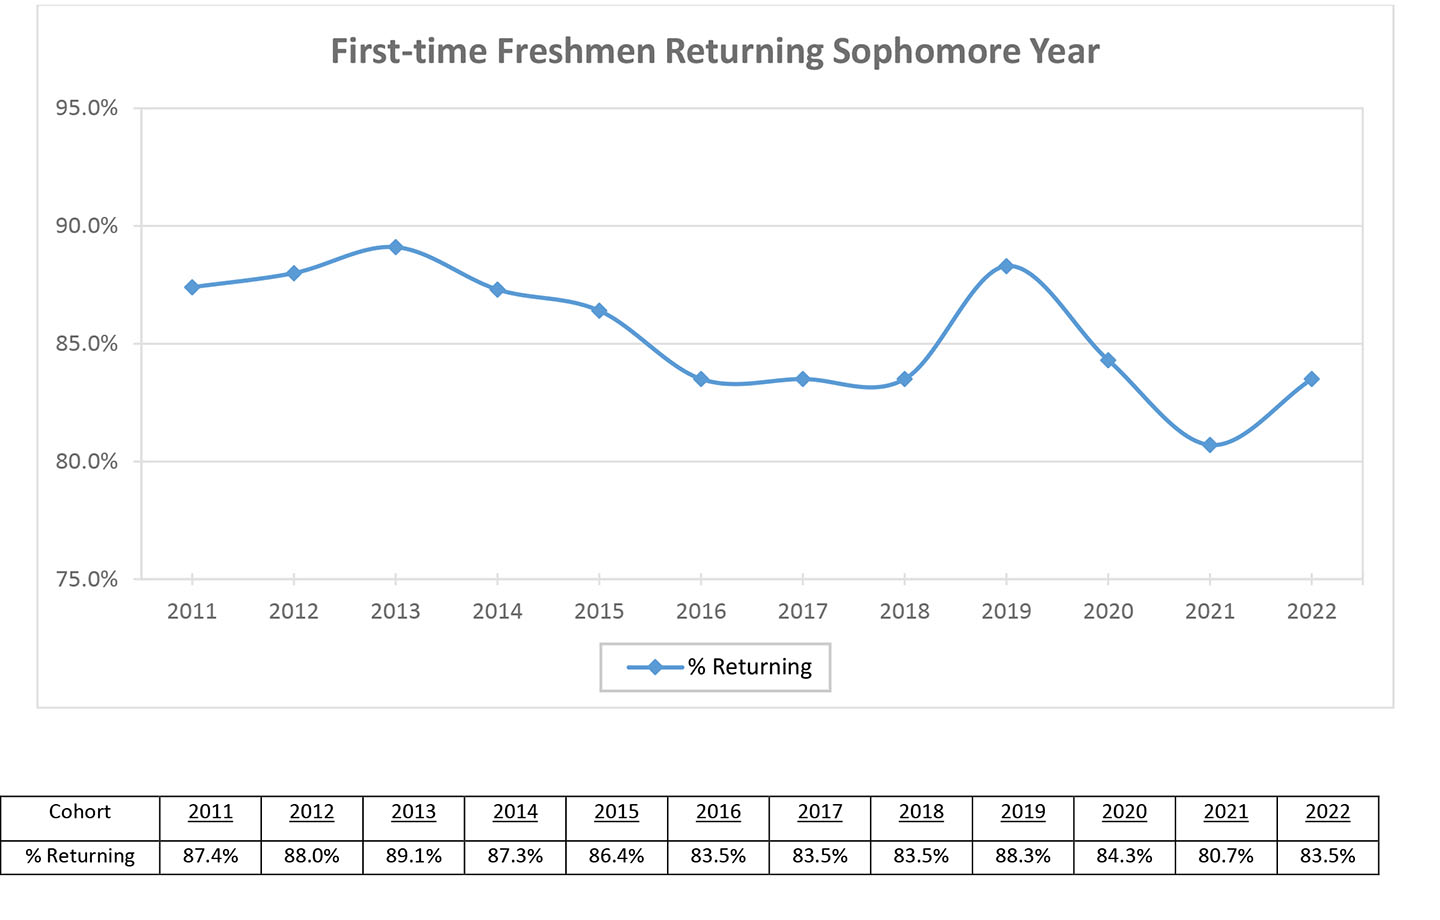 Retention Rates for Undergraduate Students-First-time Freshmen Returning Sophomore Year. Chart - 2011 87.4%, 2012 88.0%, 2013 89.1%, 2014 87.3%, 2015 86.4%, 2016 83.5%, 2017 83.5%, 2018 83.5%, 2019 88.3%, 2020 84.3%, 2021 80.7%, 2022 83.5%.